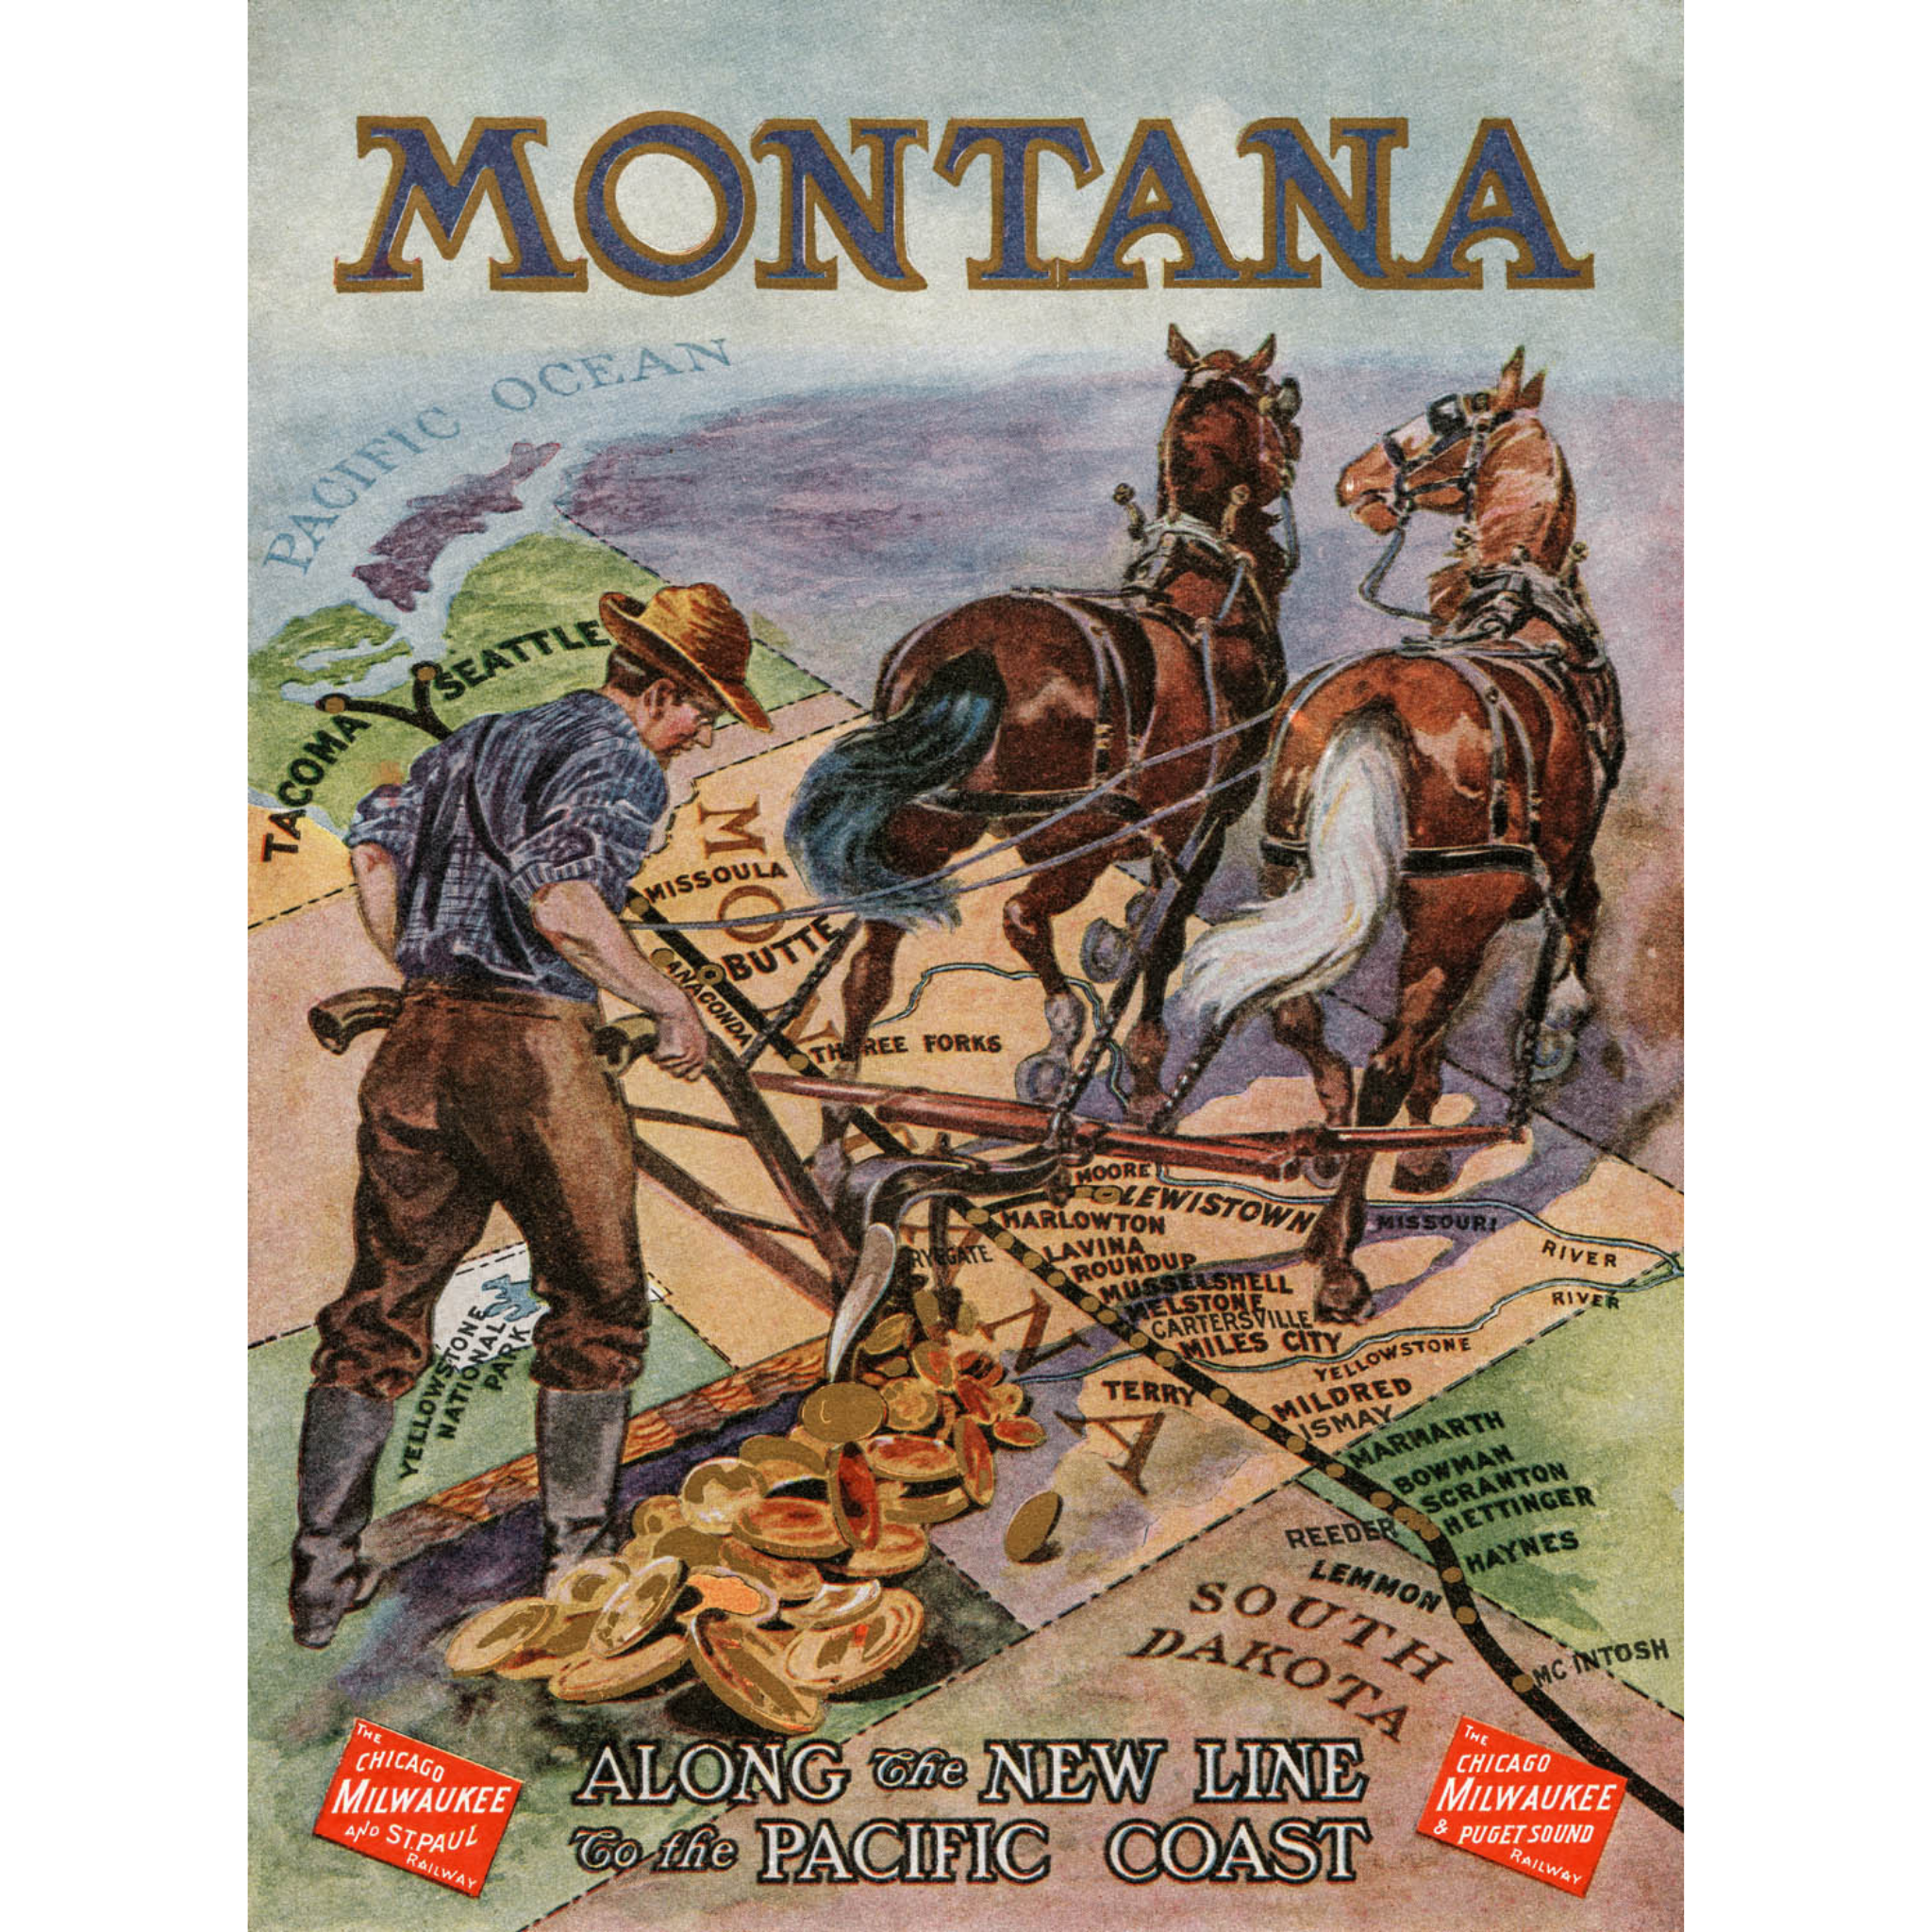 Montana: Along the New Line to the Pacific Coast - ca. 1916 Lithograph